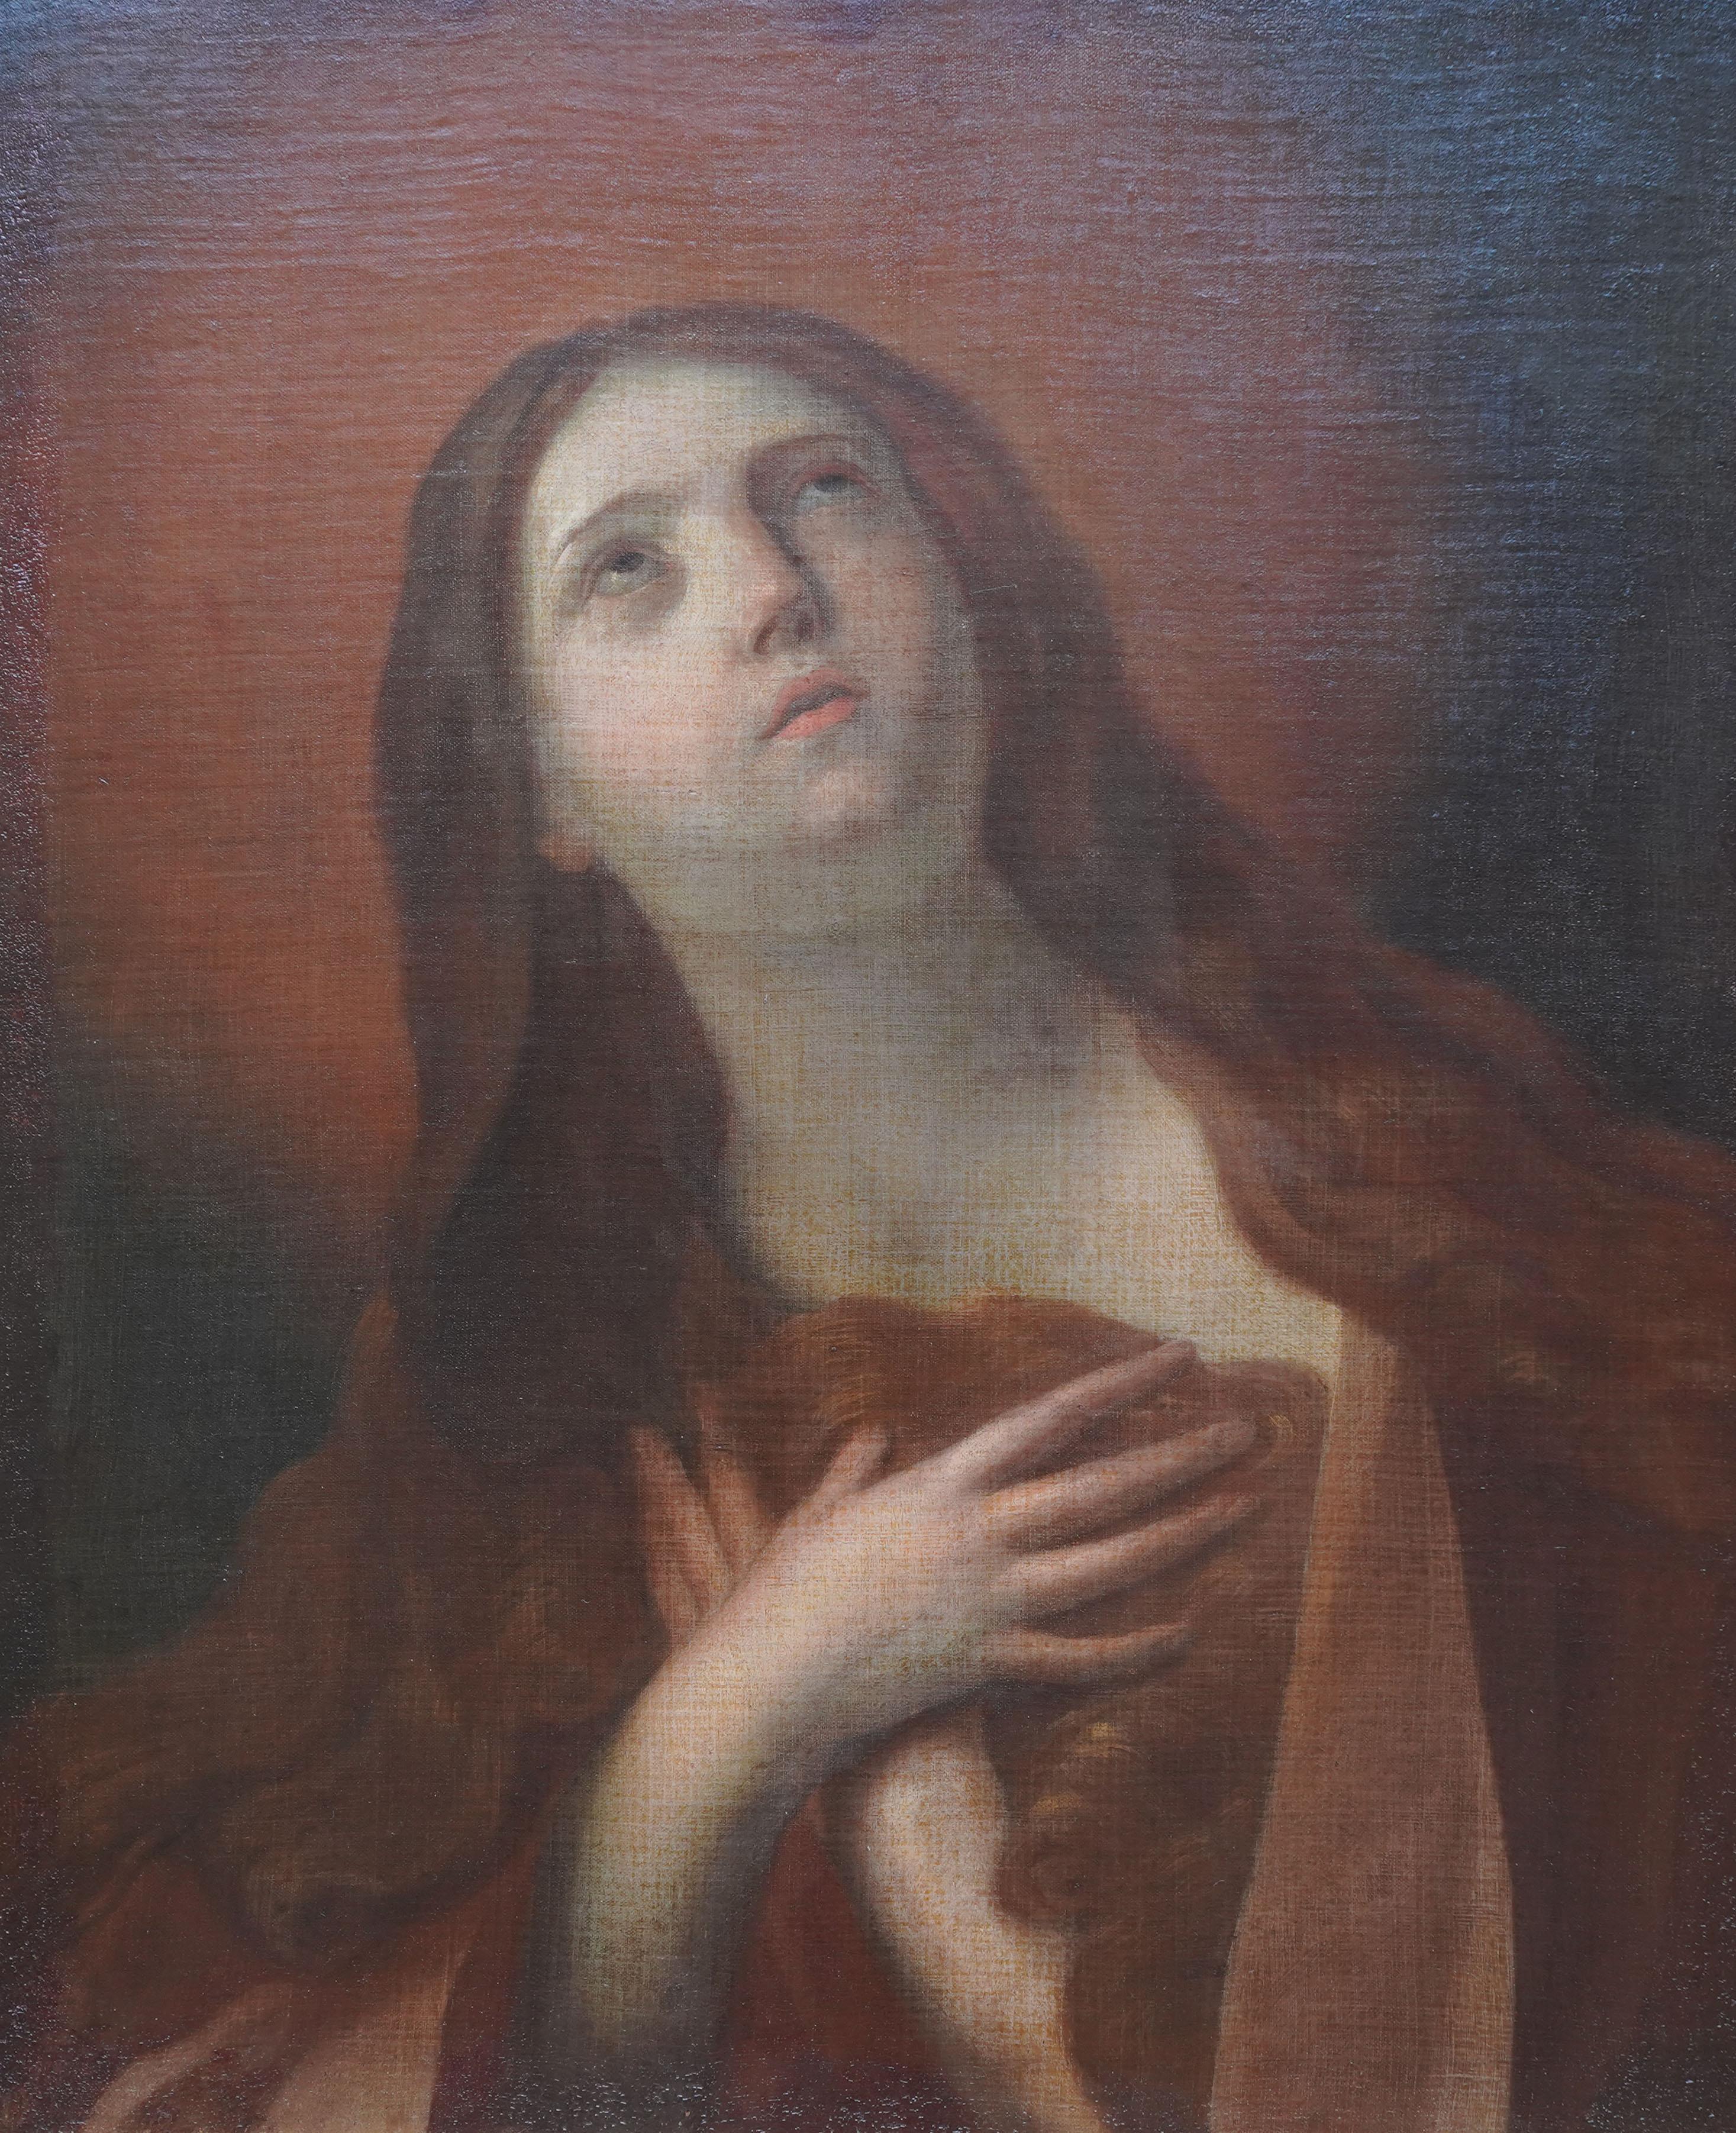 The Penitent Mary Magdalene - Old Master religious art portrait oil painting For Sale 1